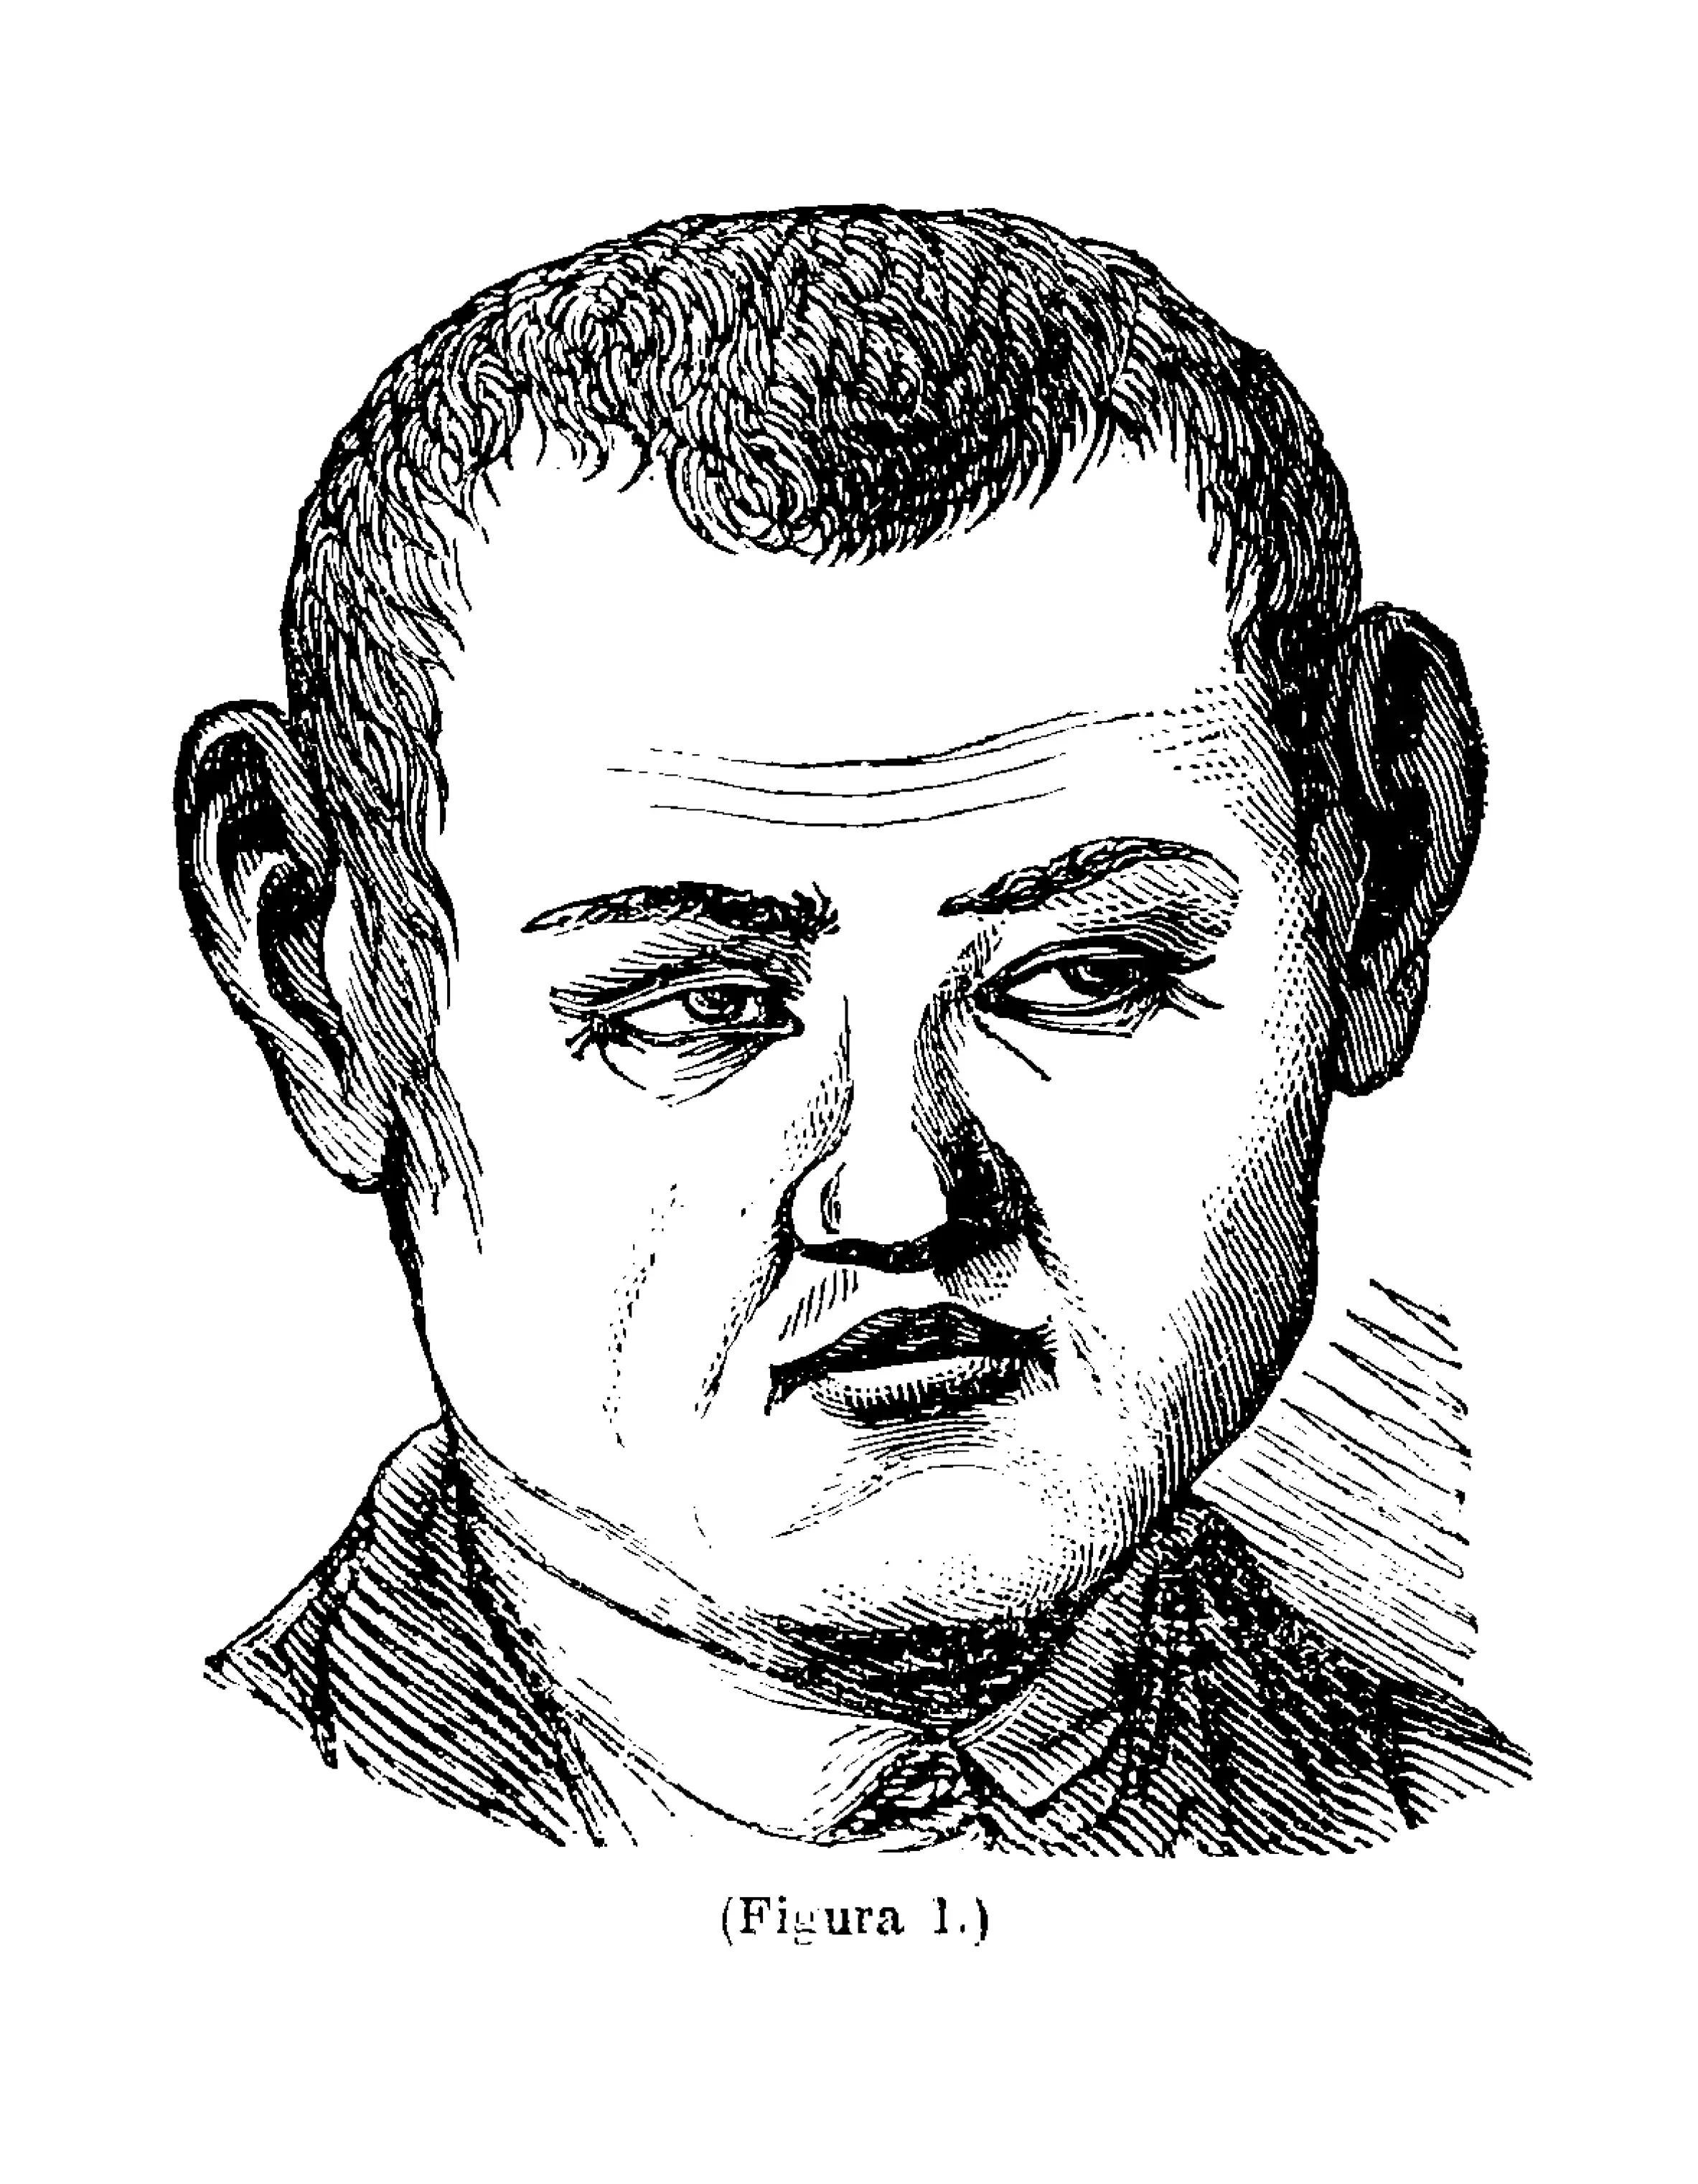 Drawing of a man with an elongated, scowling face.